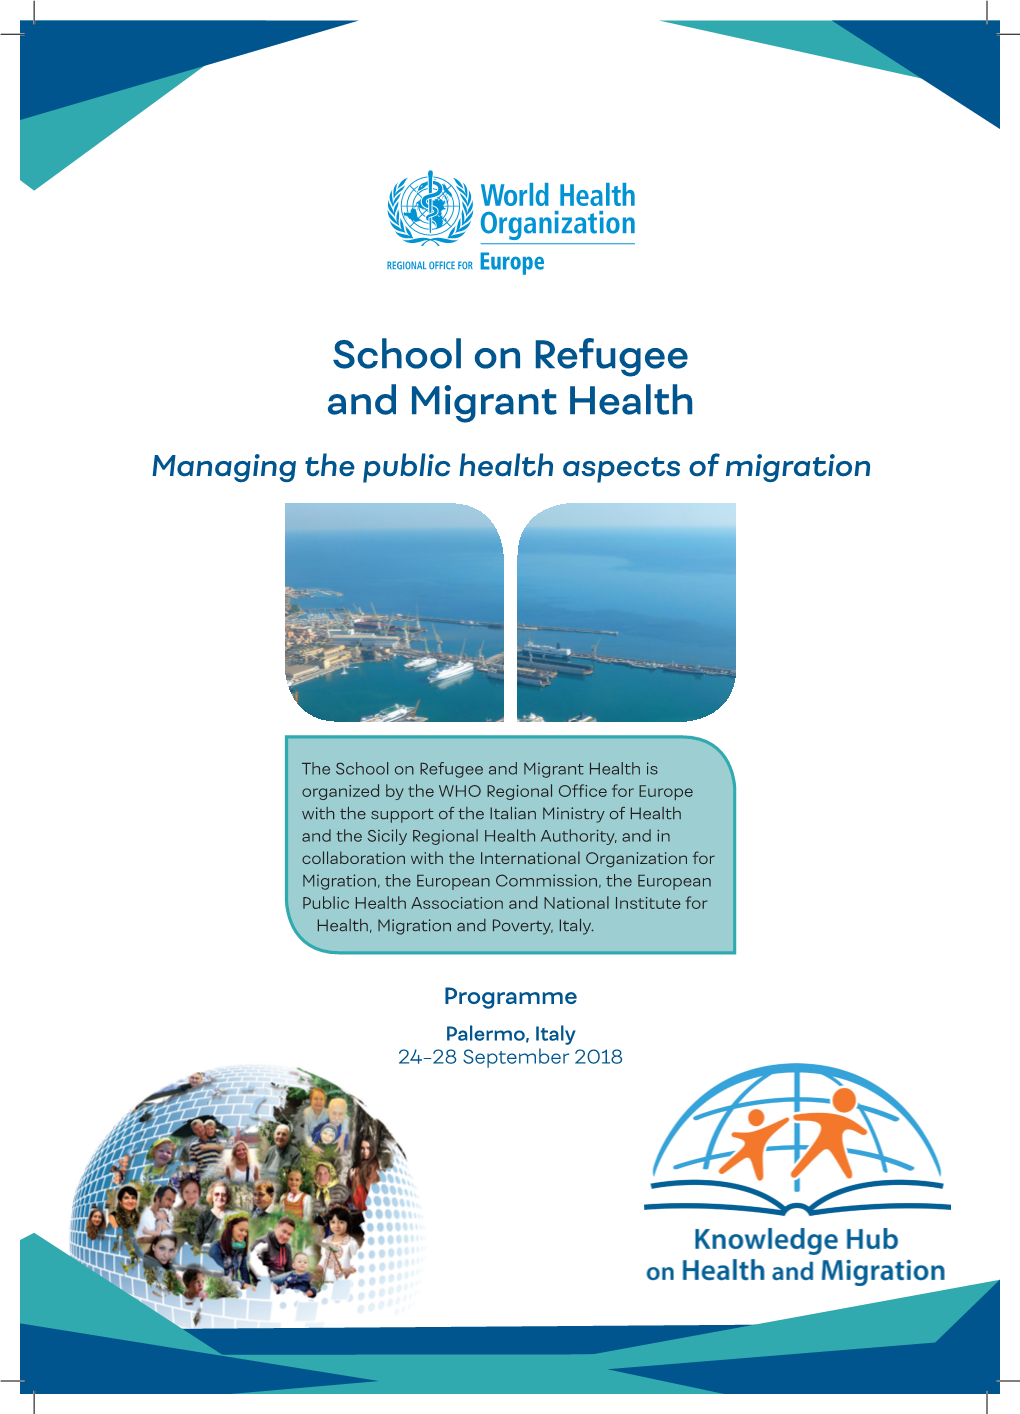 School on Refugee and Migrant Health